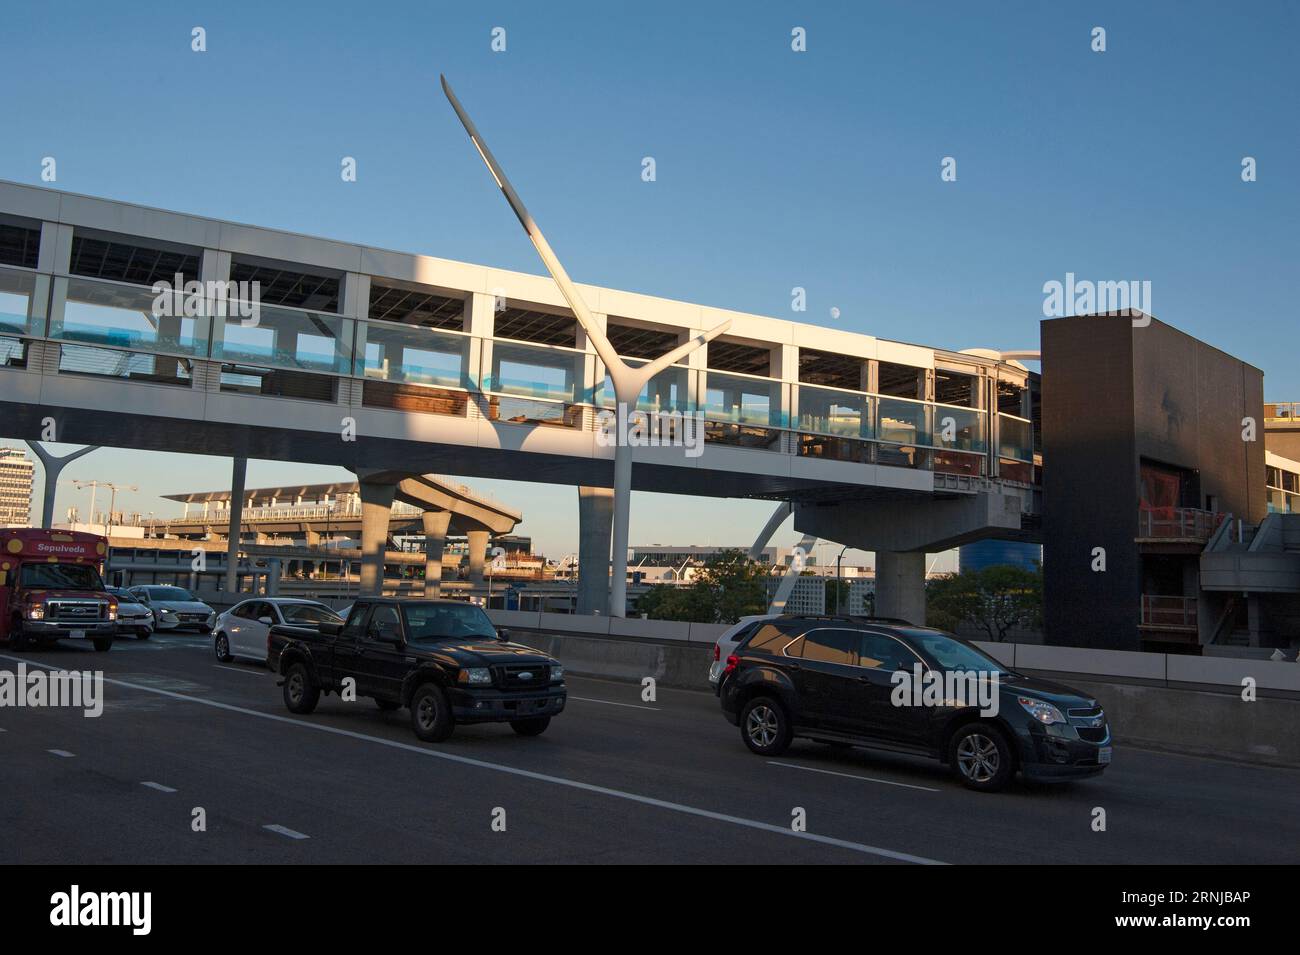 Automobile traffic on the arrival level of LAX Airport passes under a pedestrian bridge with the newly installed Metro Rail station in background. Stock Photo